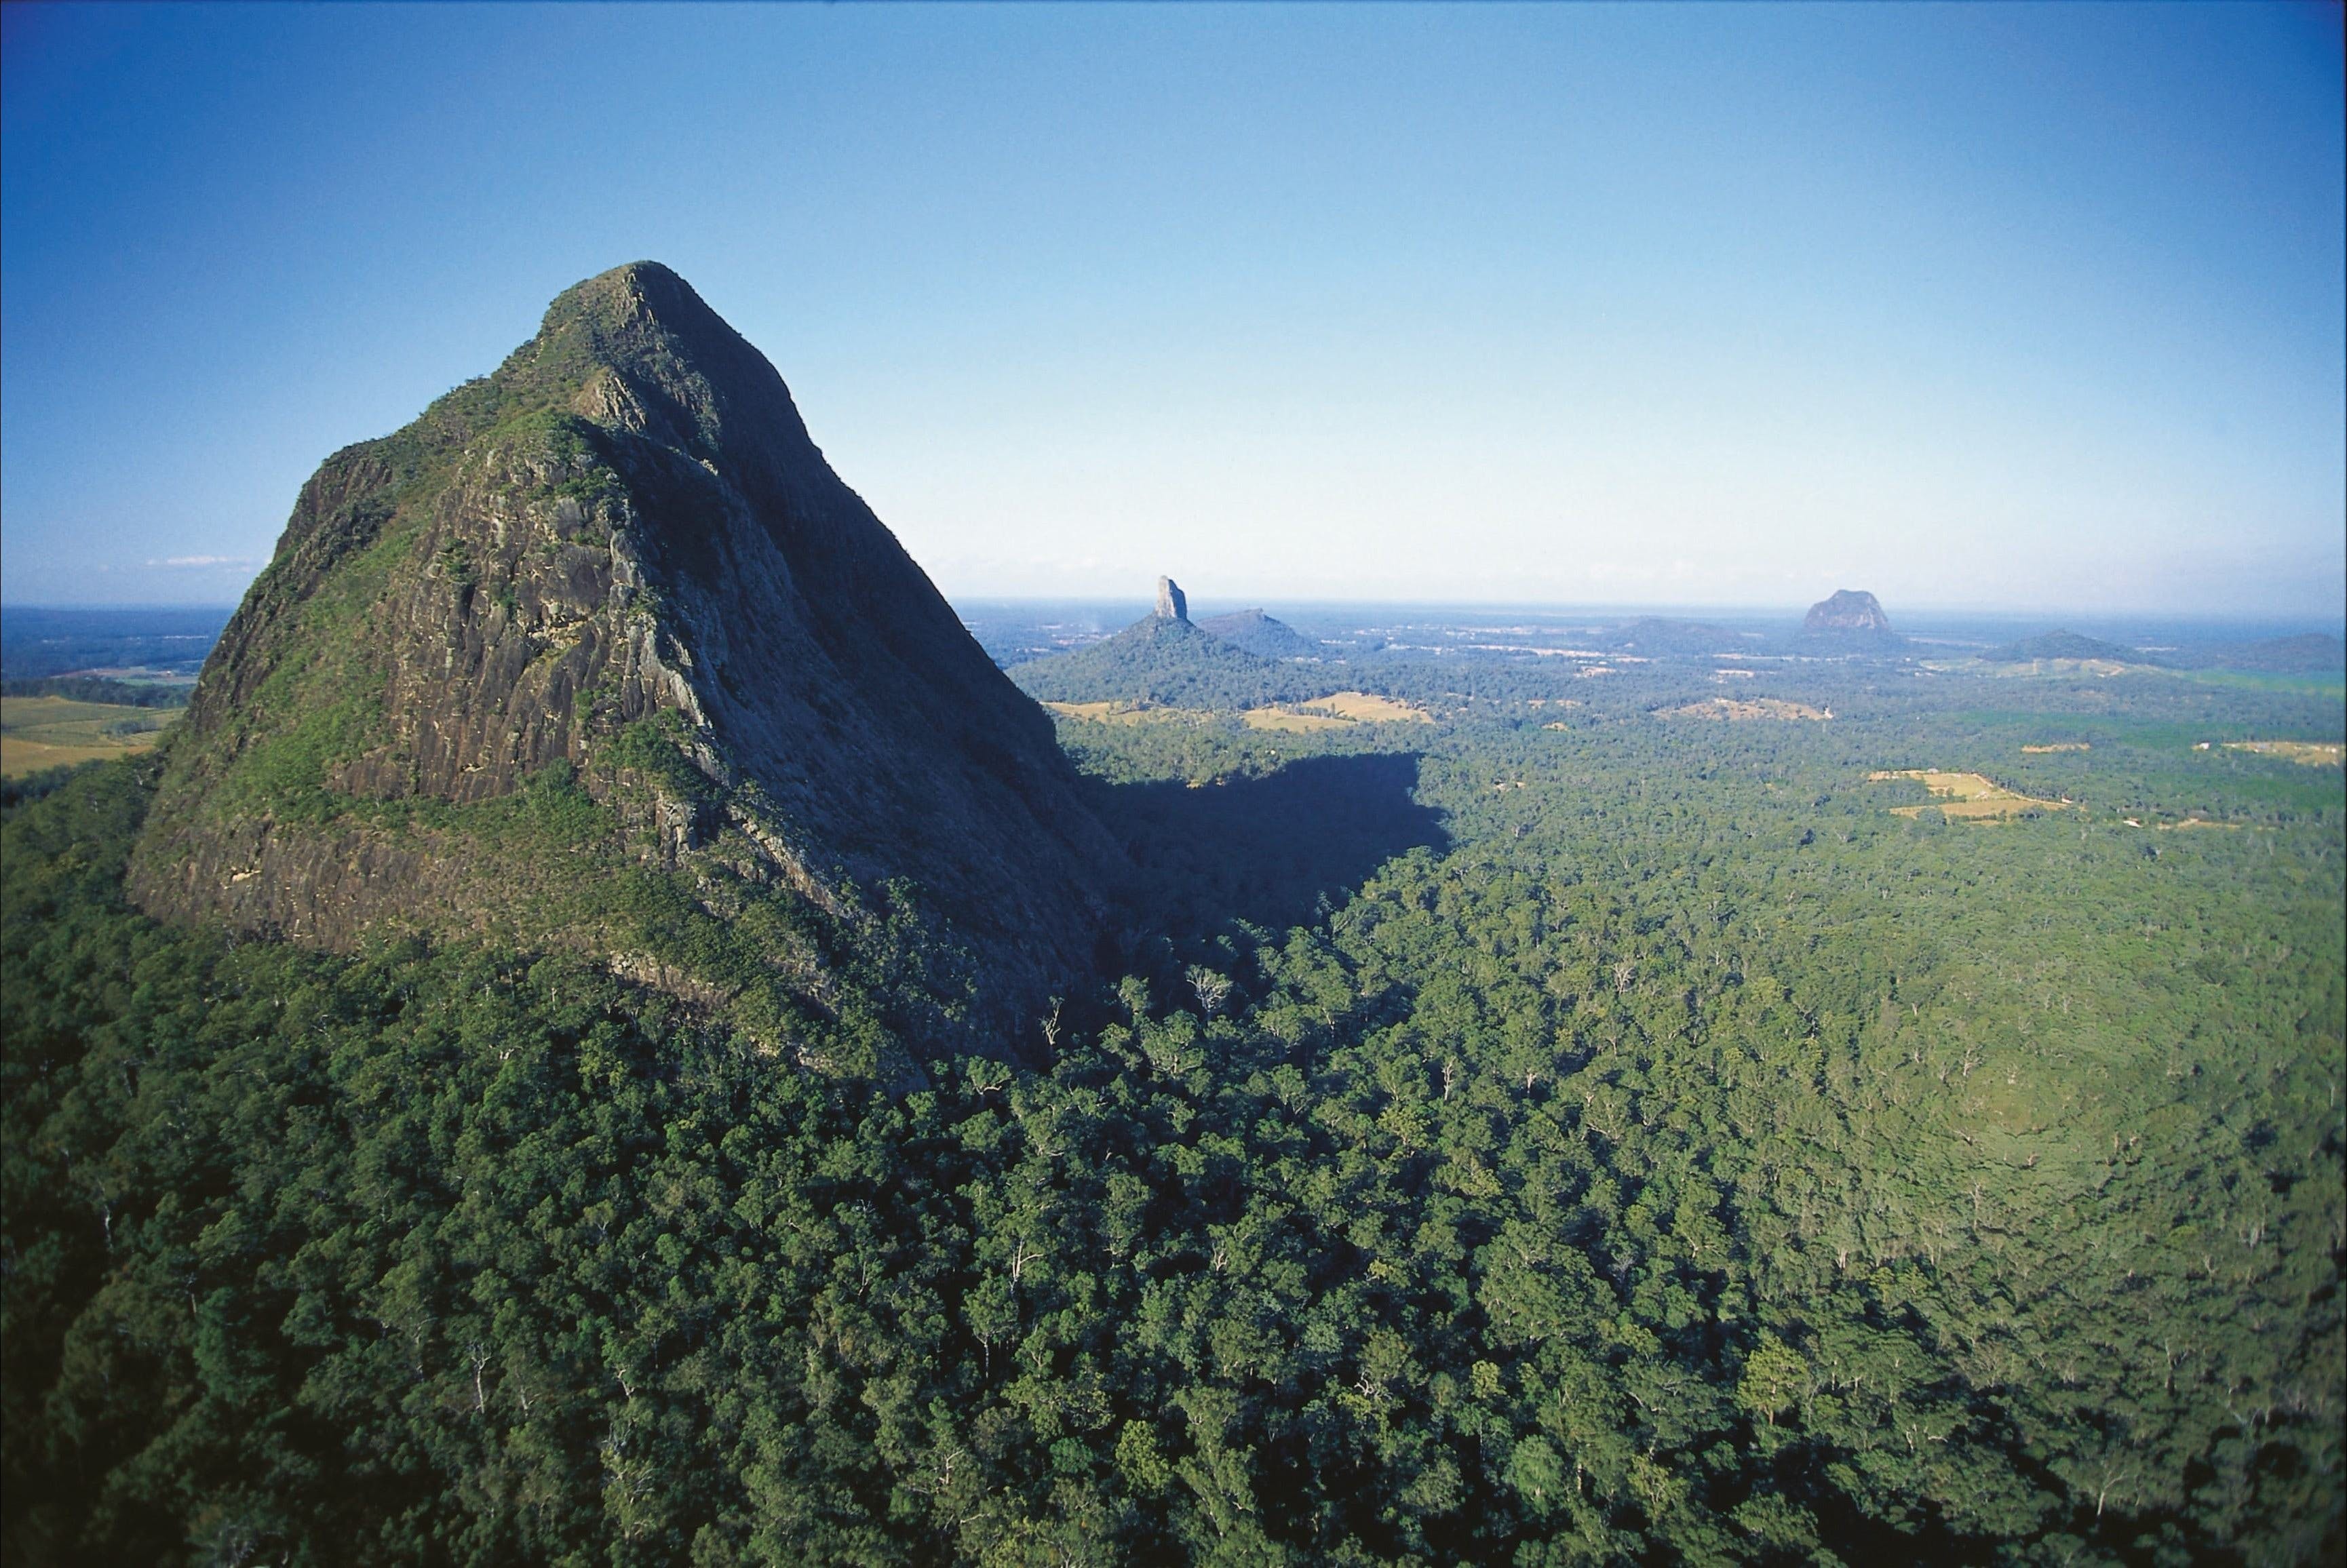 Glass House Mountains National Park